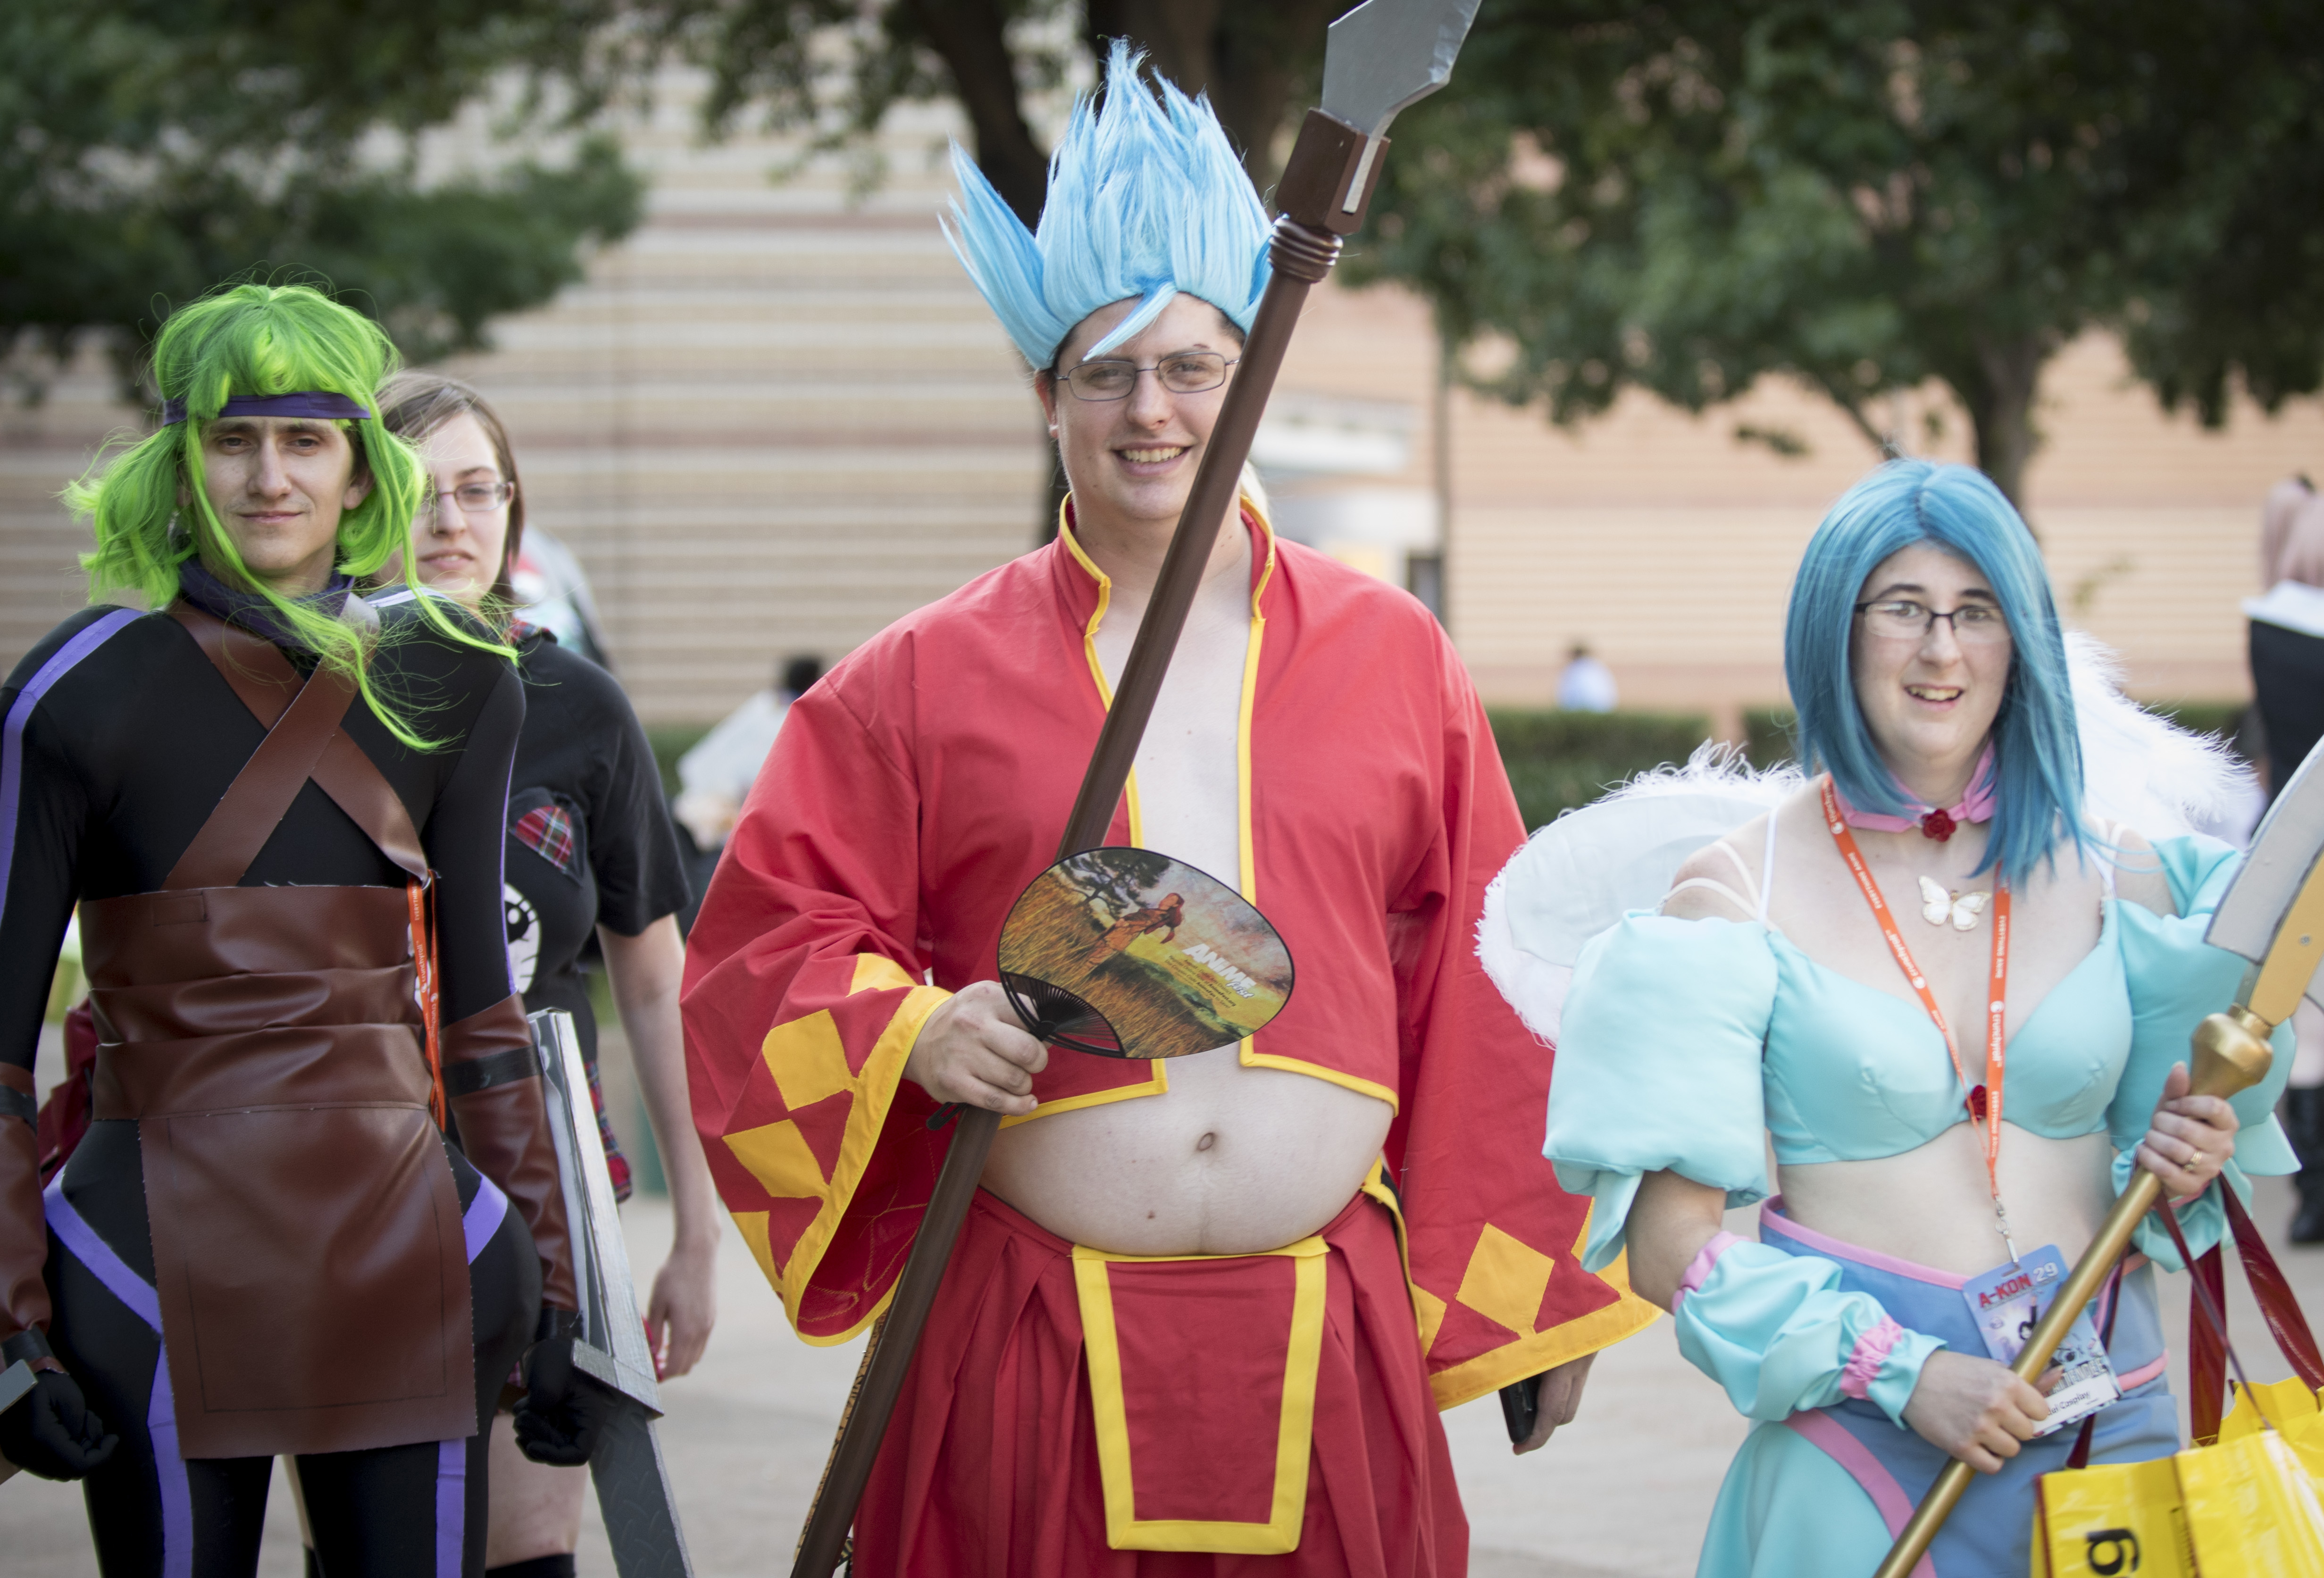 Anime Convention Images Browse 16080 Stock Photos  Vectors Free Download  with Trial  Shutterstock